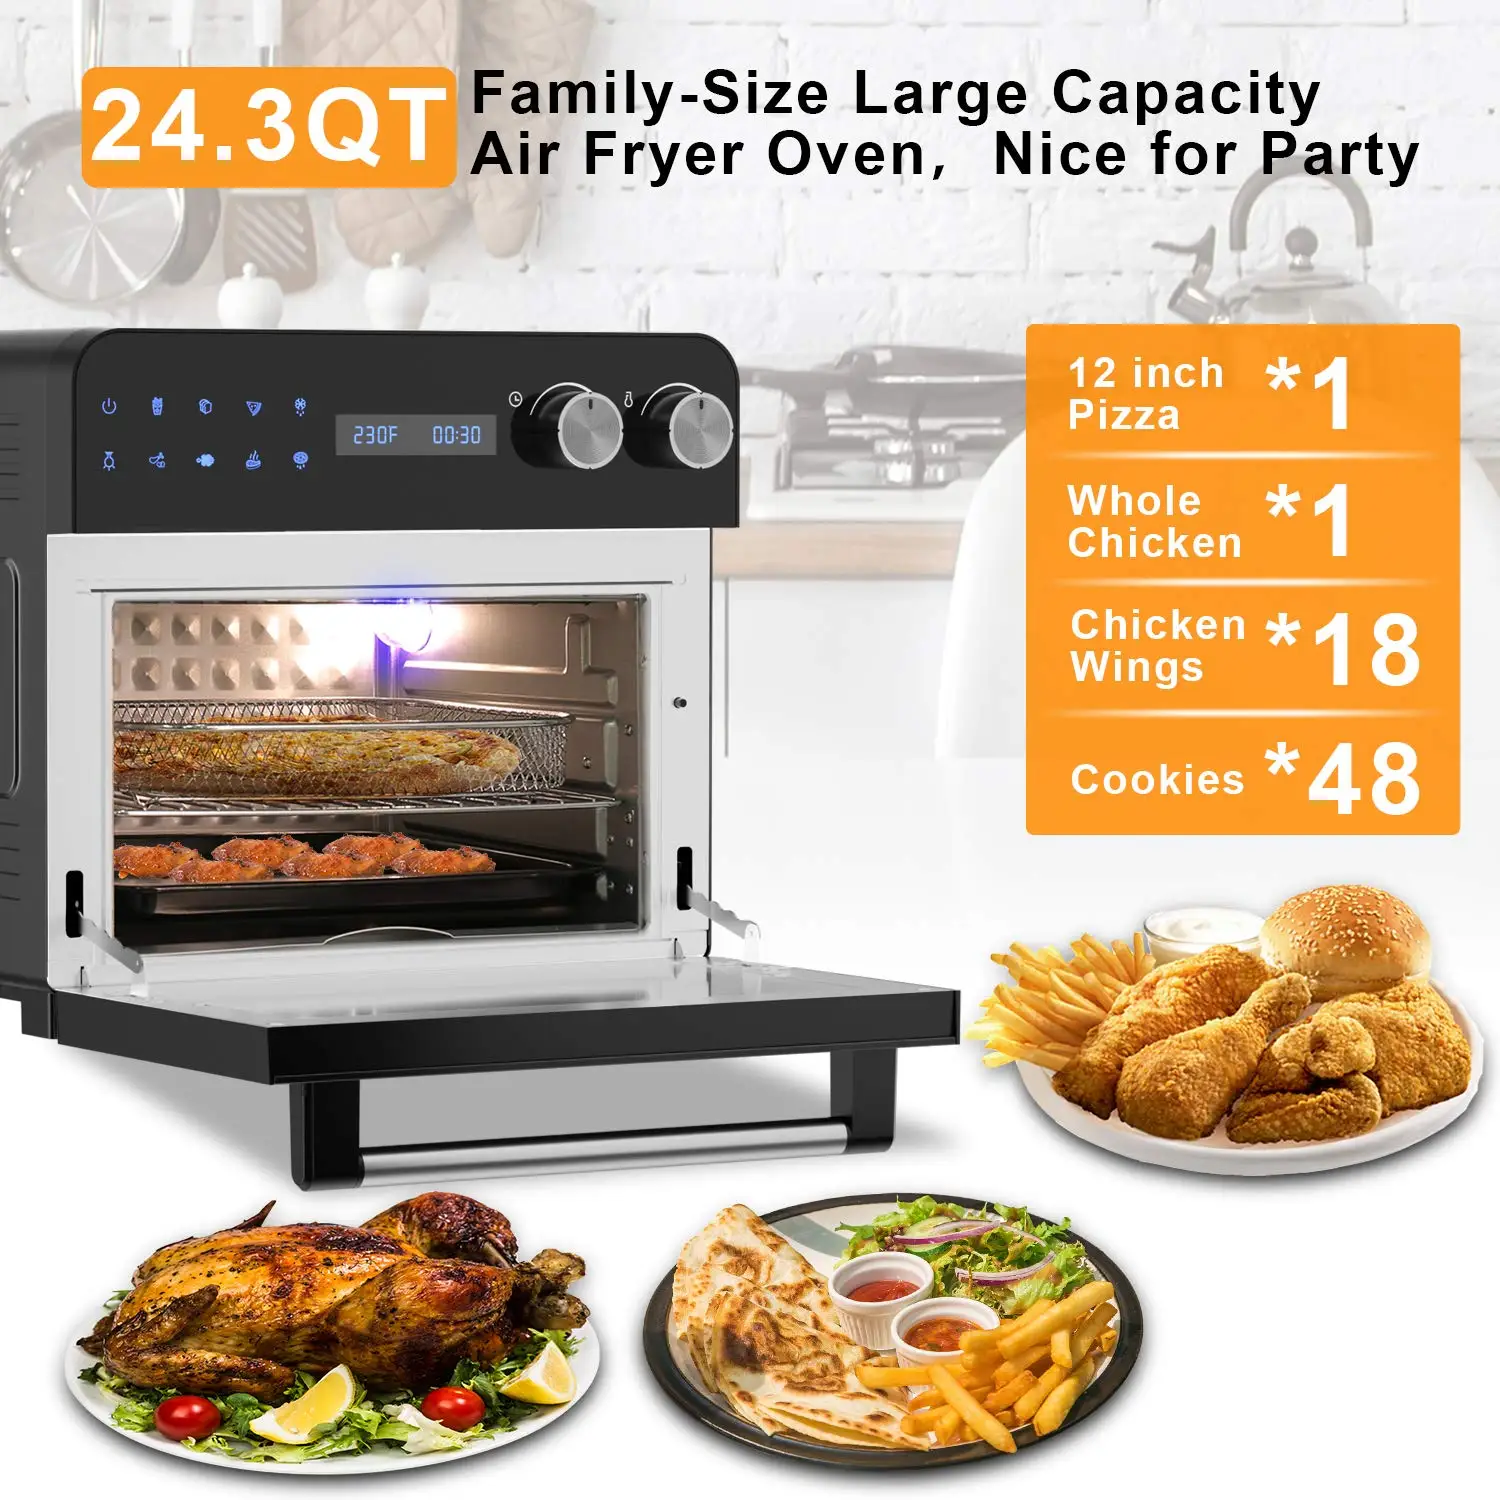 MOOSOO MA90 1700W 24.3 Quart Large Capacity Air Fryer Oven With LED Digital Touchscreen Air Fryer Oven Airfryer Convection Oven